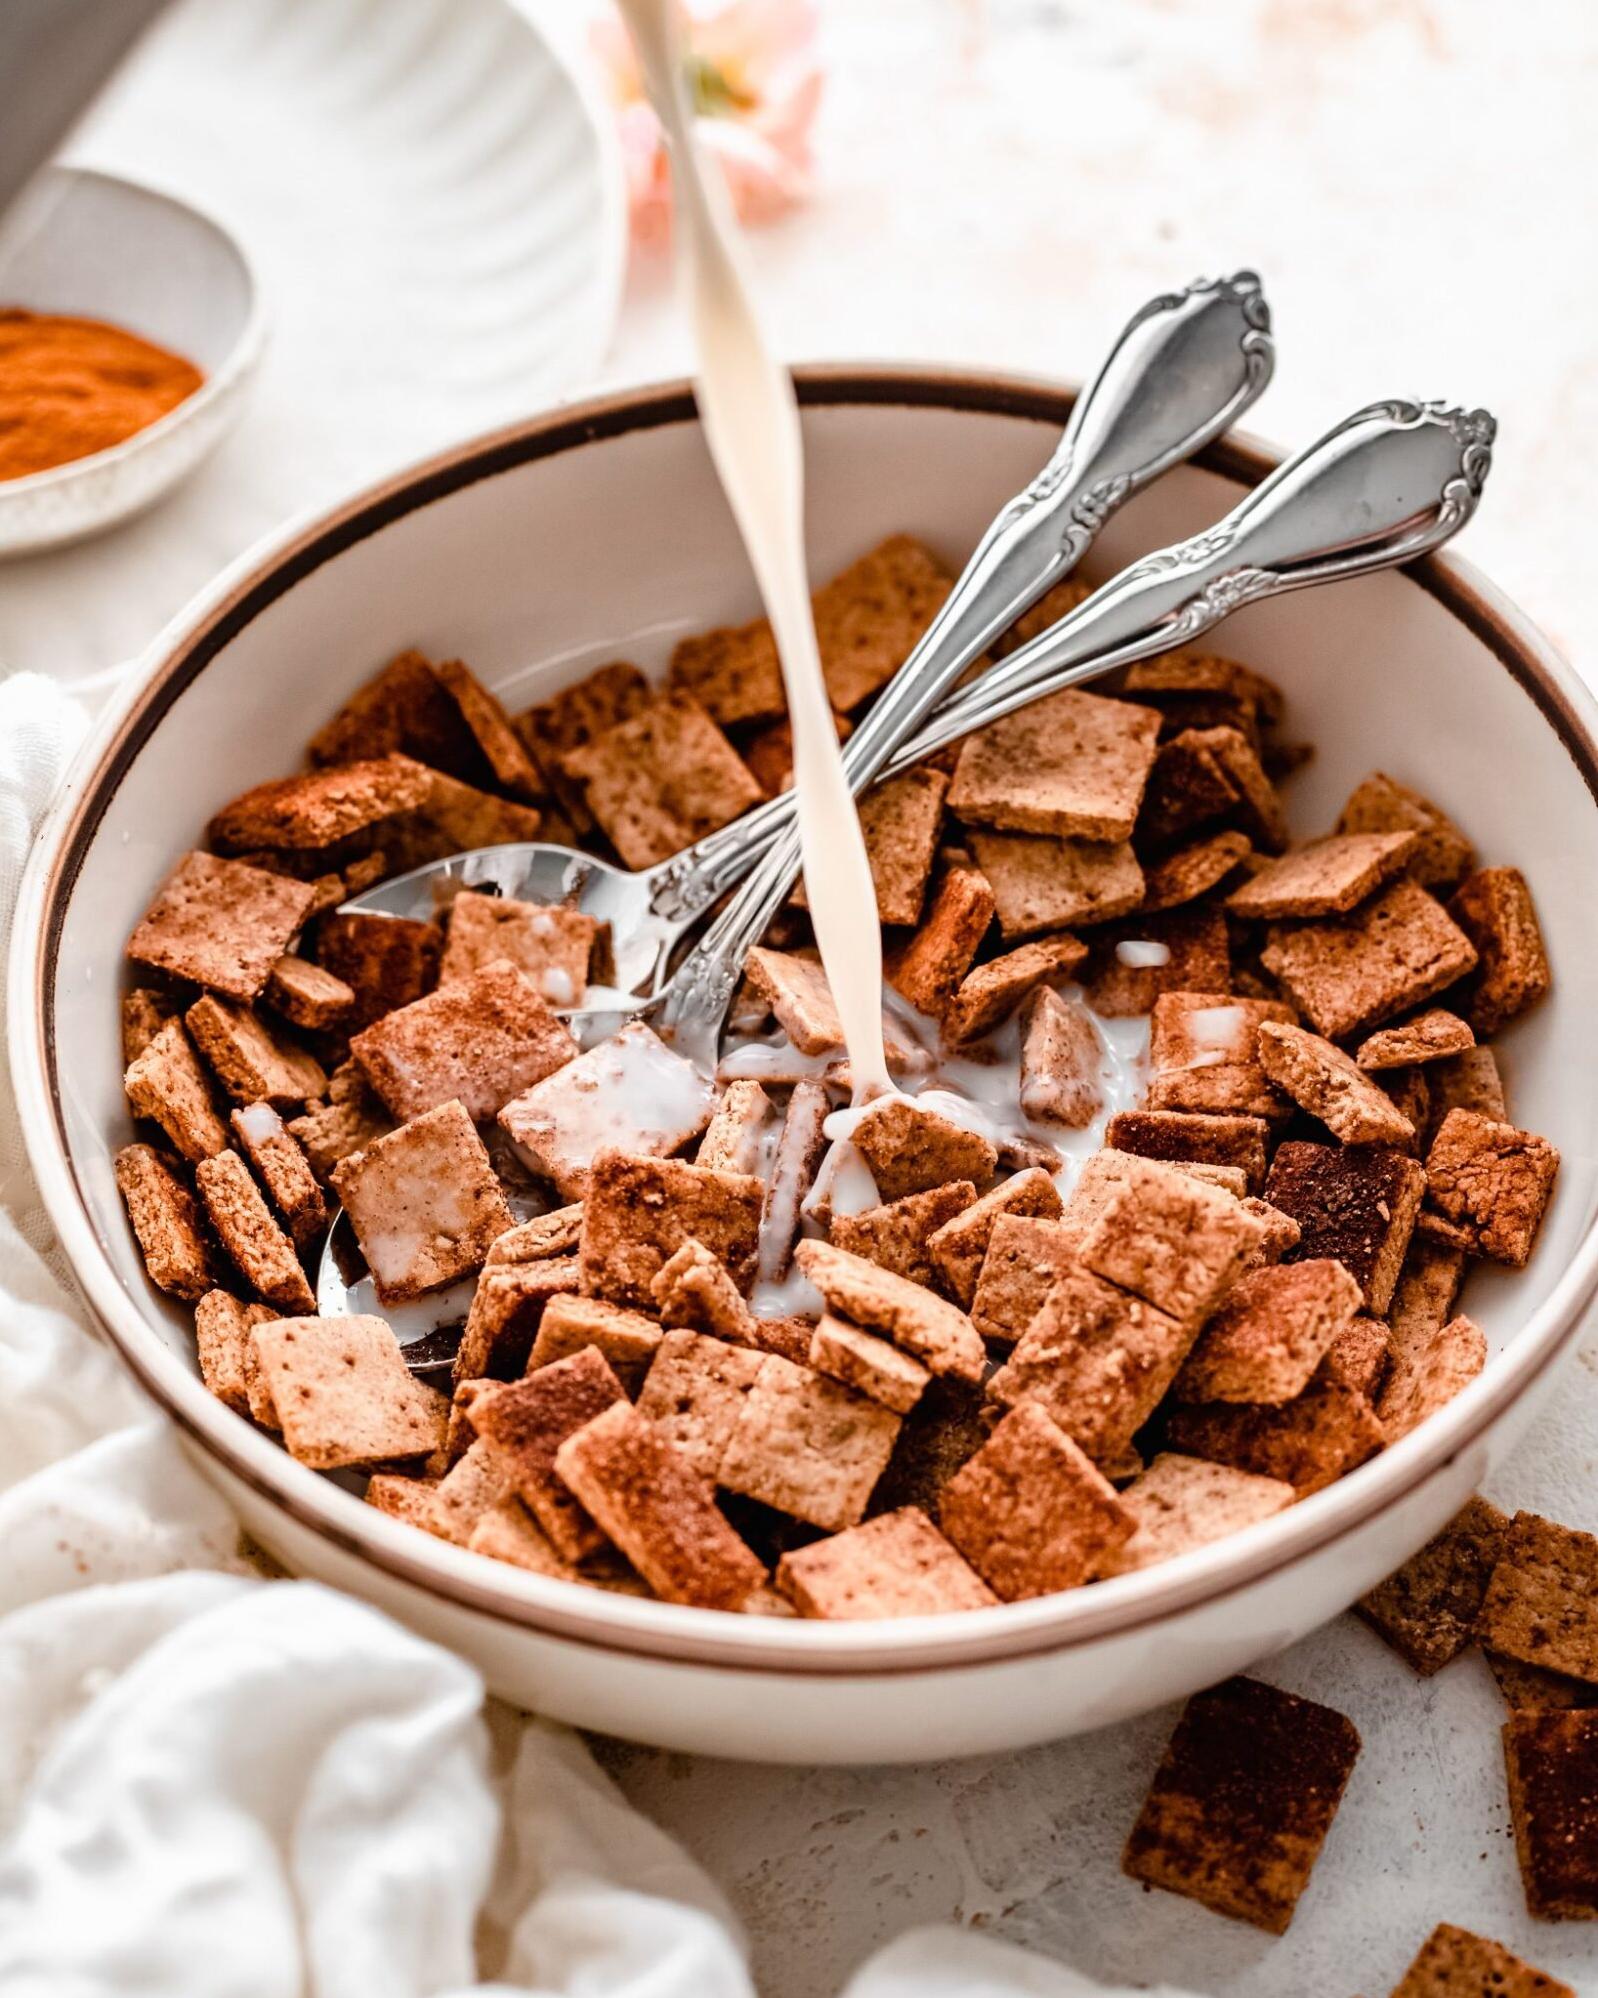  Satisfy your sweet tooth and stay healthy with this gluten-free cereal.